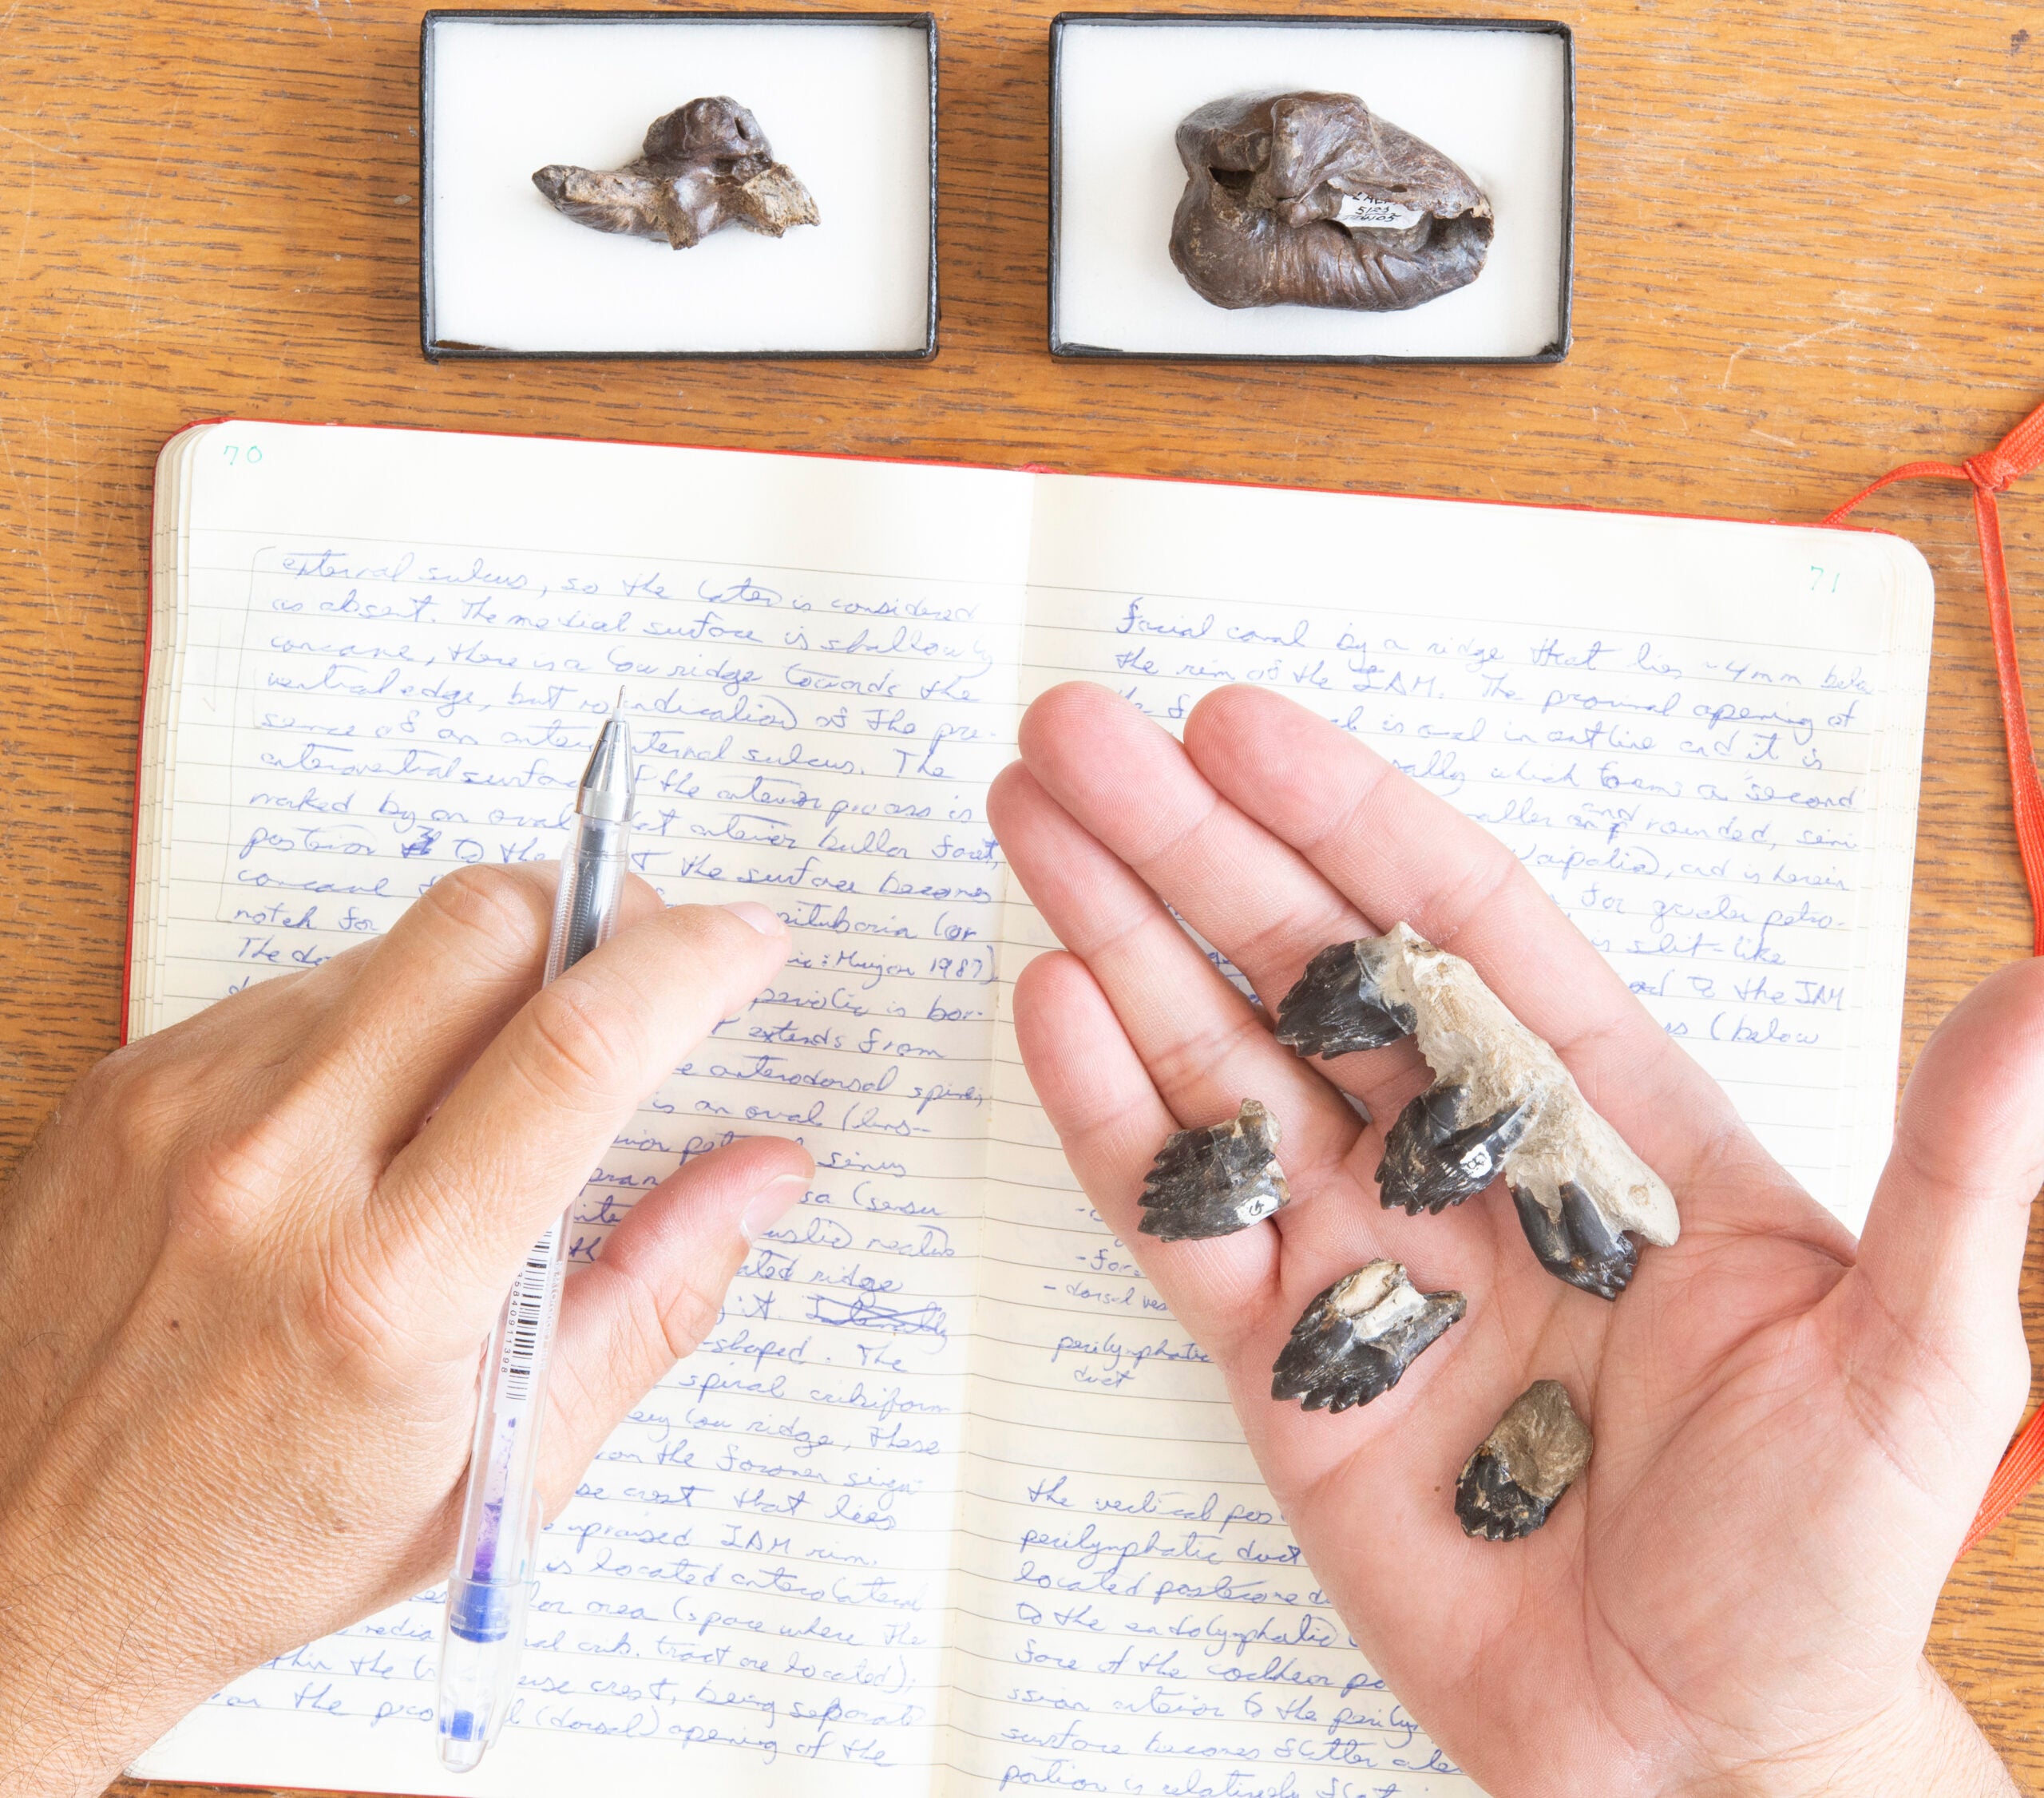 A hand holds some fossilized specimens over a nobteook with notes handwritten in blue pen. Two other fossils sit on top of the notebook